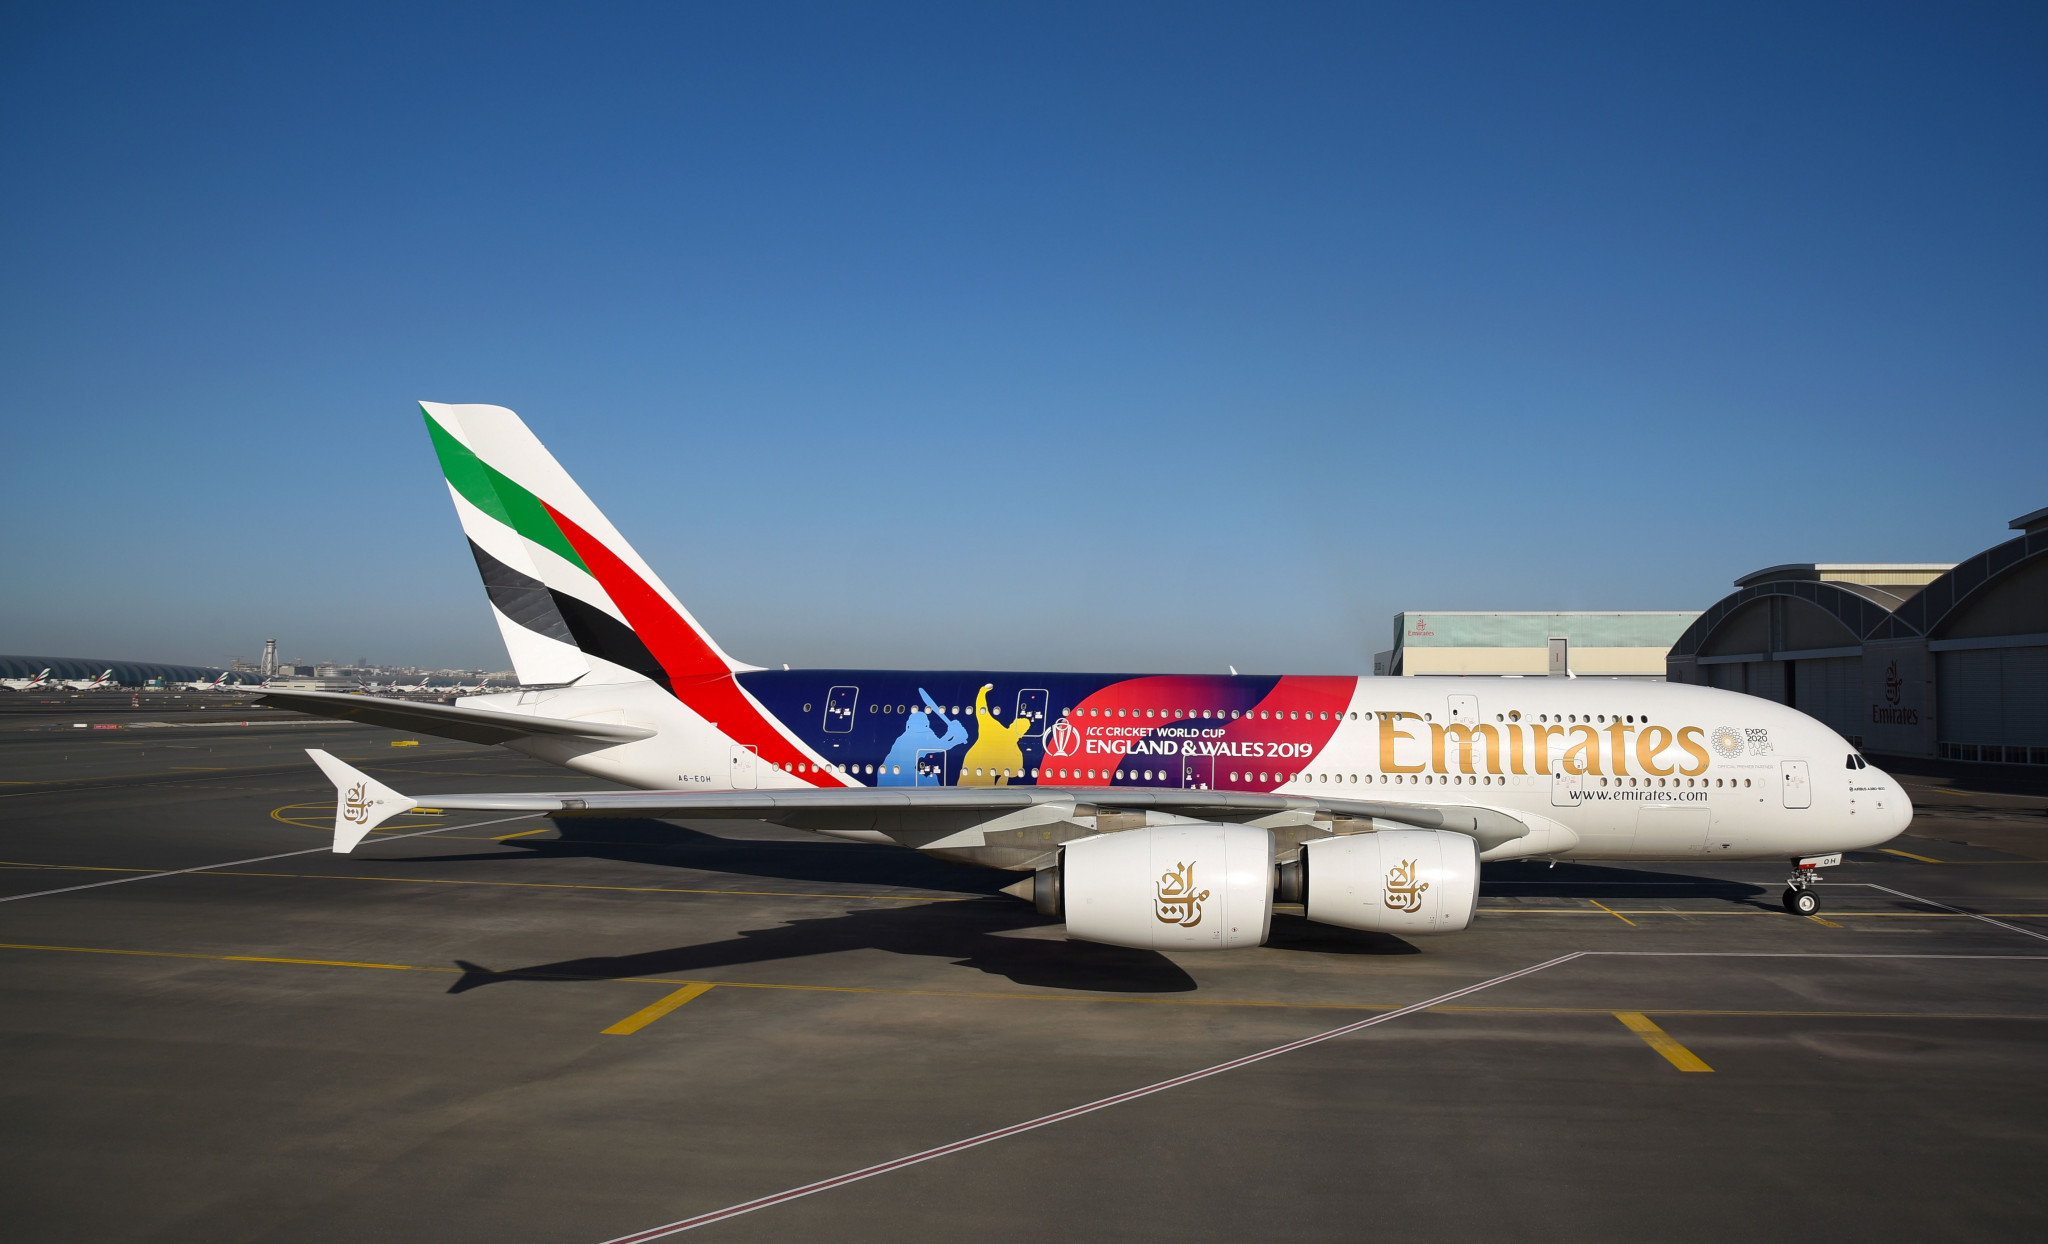 Emirates has revealed a special livery for its A380 airliner in the build-up to the 2019 Men’s Cricket World Cup ©ICC